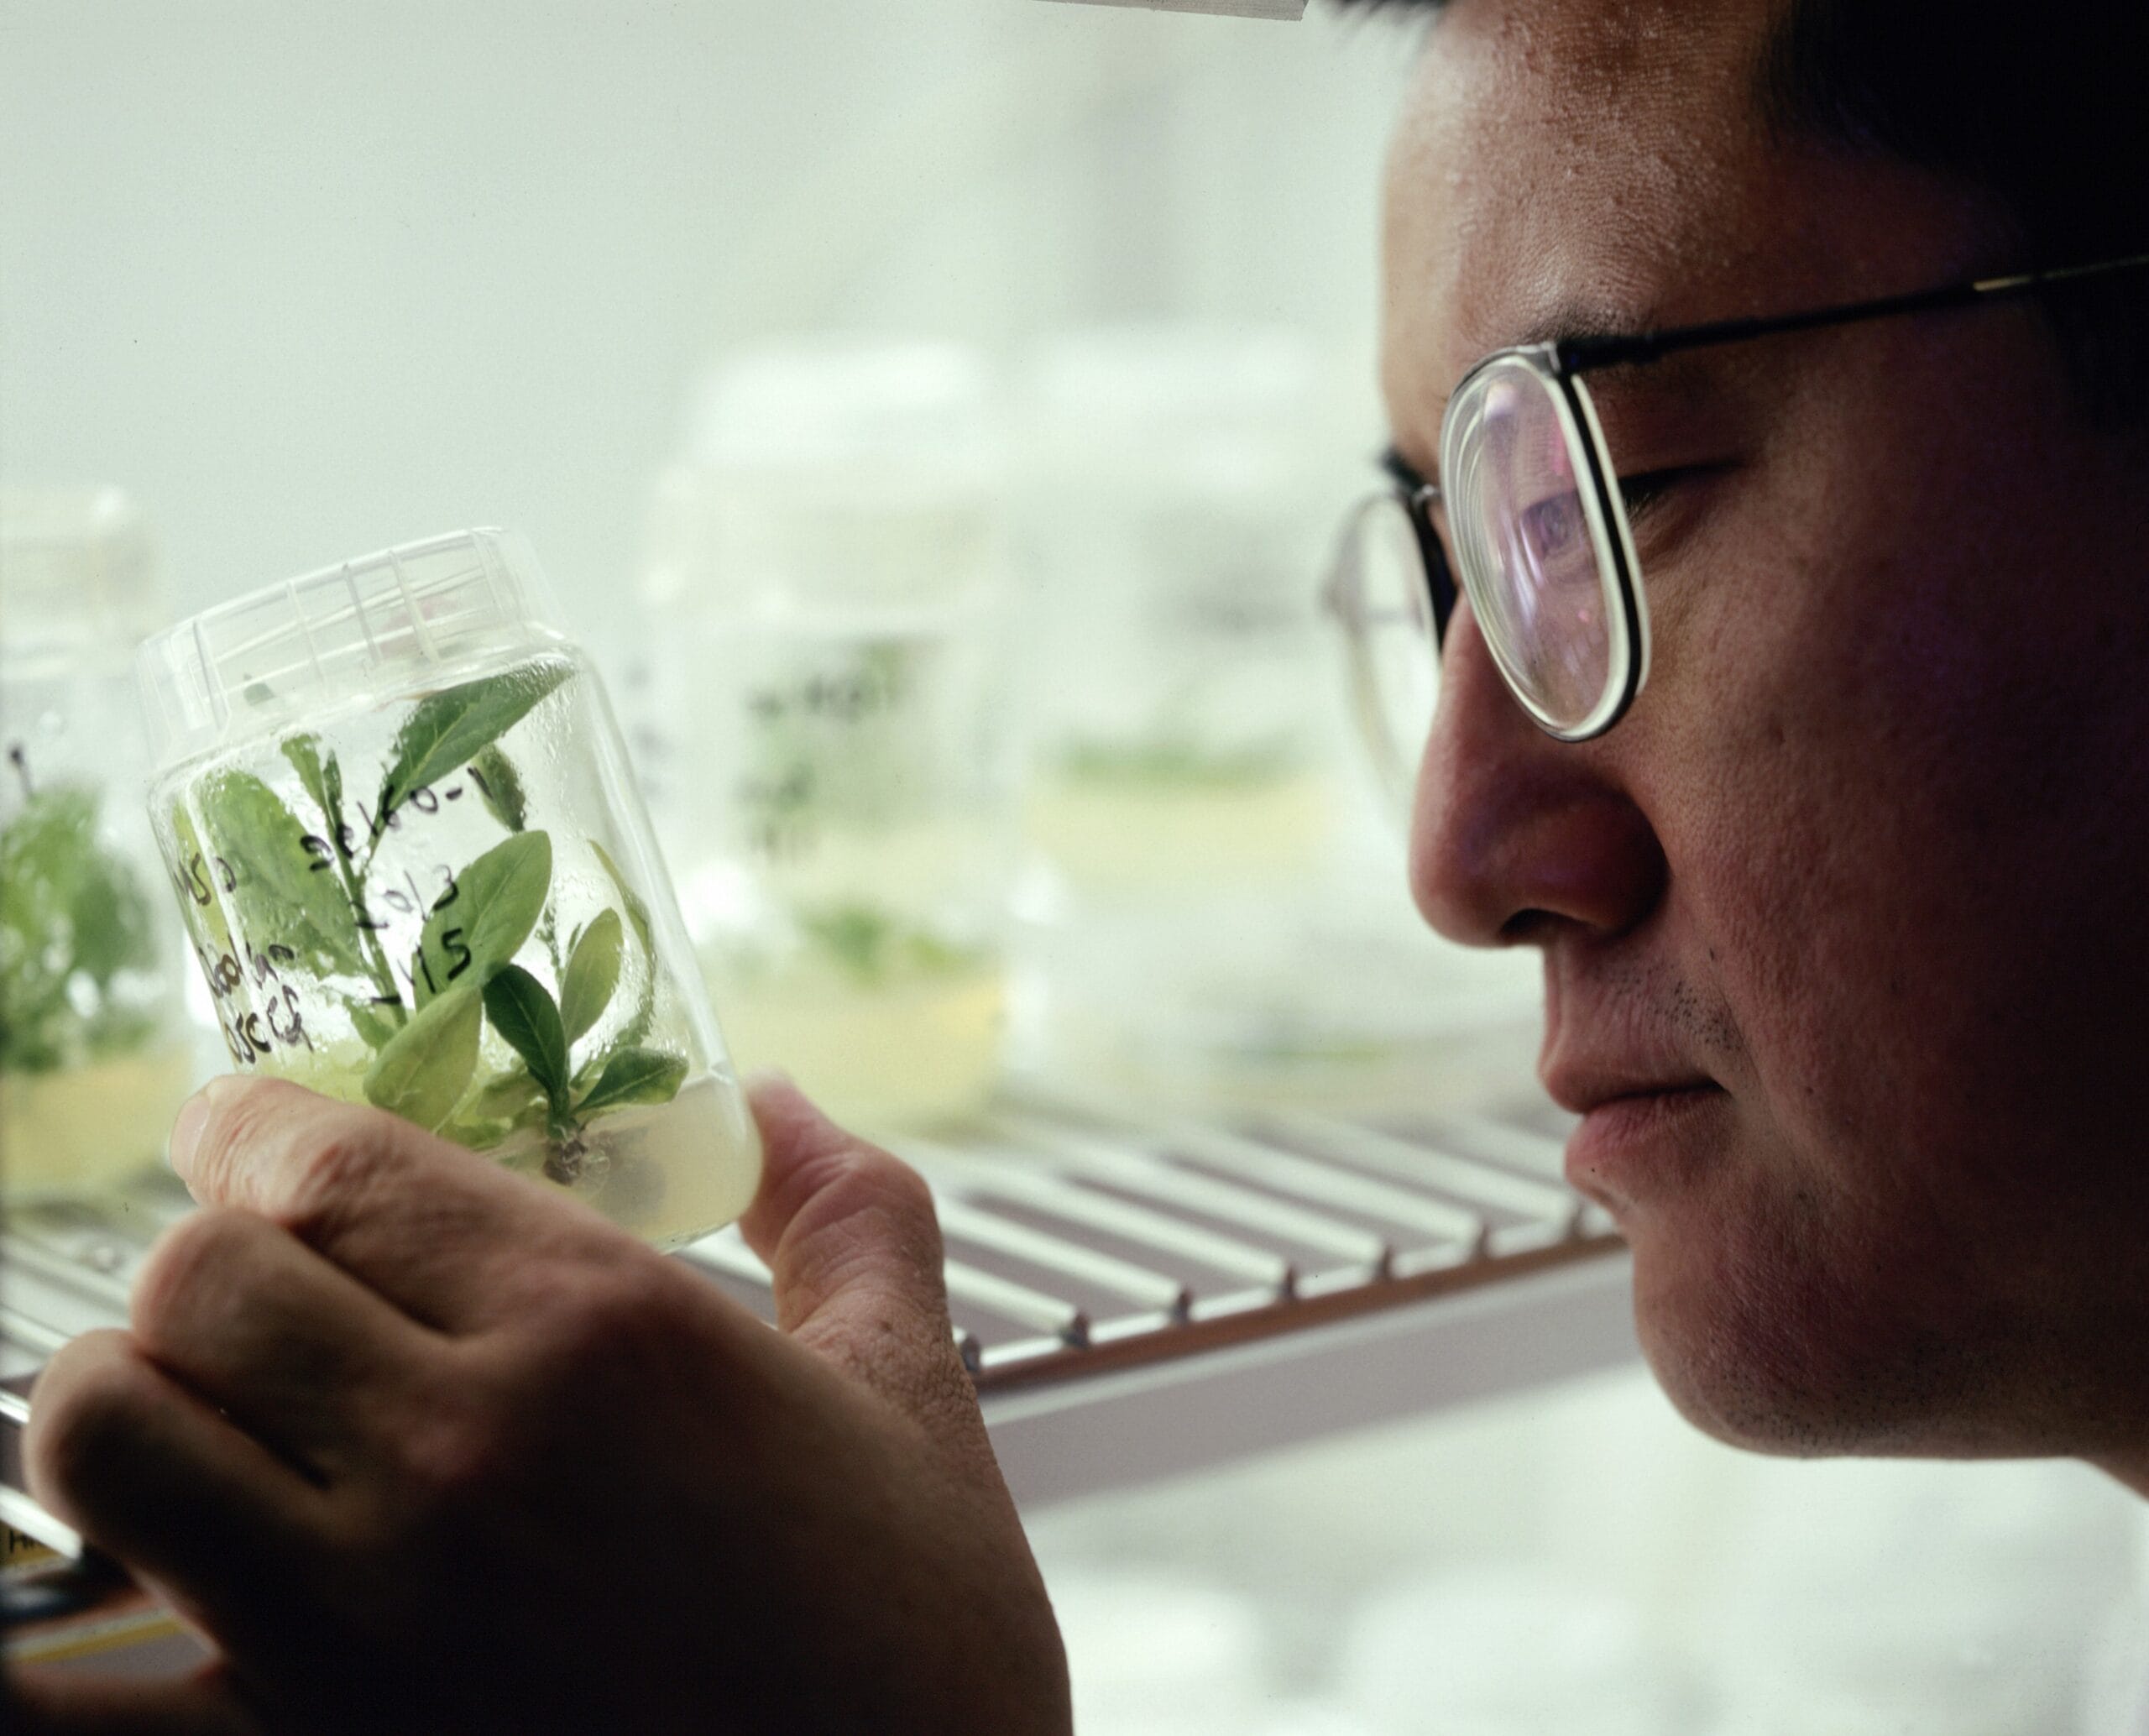 B0001358 Scientist examining plant cell cultures